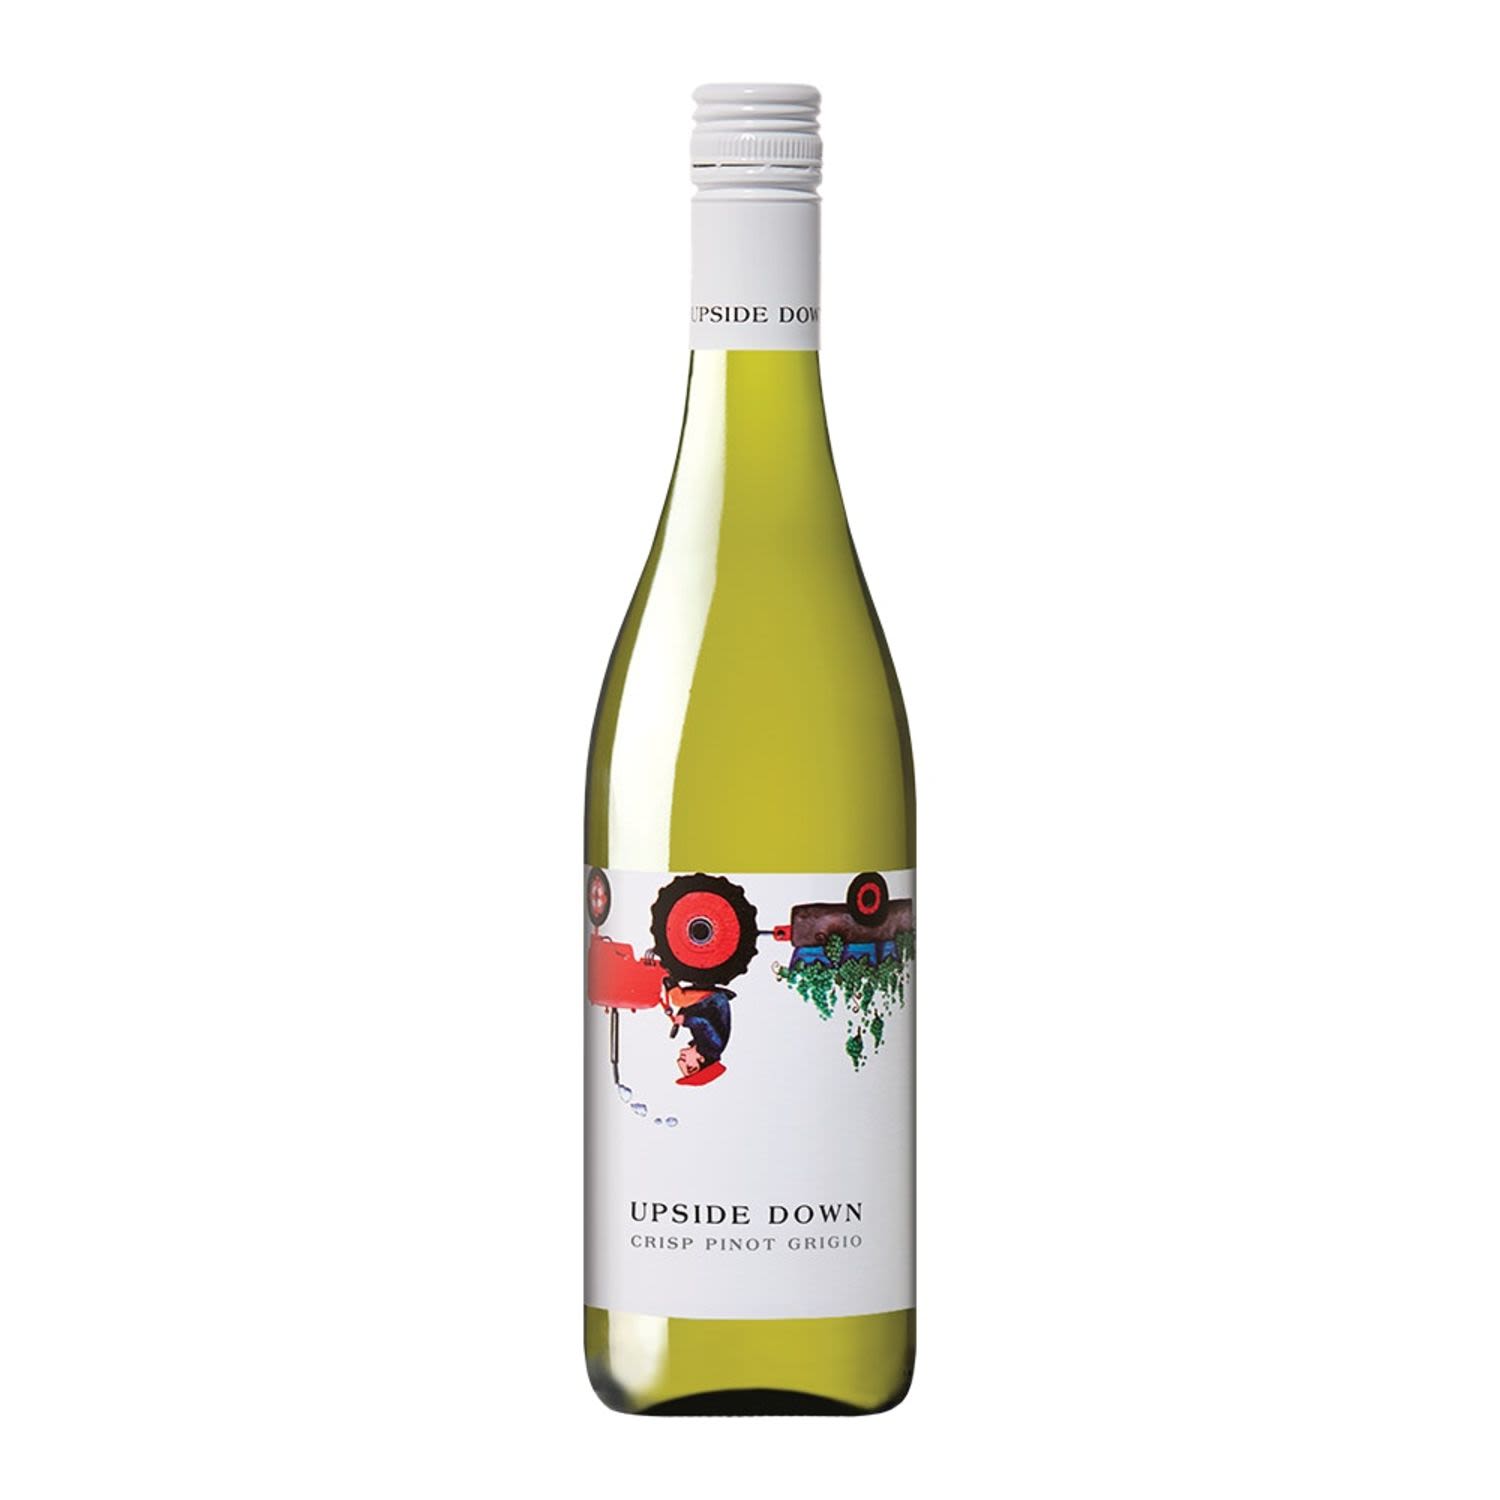 Bright, lifted aromas of fresh citrus, ripe pears & apples. All fruit notes are carried onto the palate for a medium bodied, lush wine finishing with crisp apple acidity.<br /> <br />Alcohol Volume: 12.50%<br /><br />Pack Format: Bottle<br /><br />Standard Drinks: 7.4</br /><br />Pack Type: Bottle<br /><br />Country of Origin: Australia<br /><br />Region: South Eastern Australia<br /><br />Vintage: Vintages Vary<br />